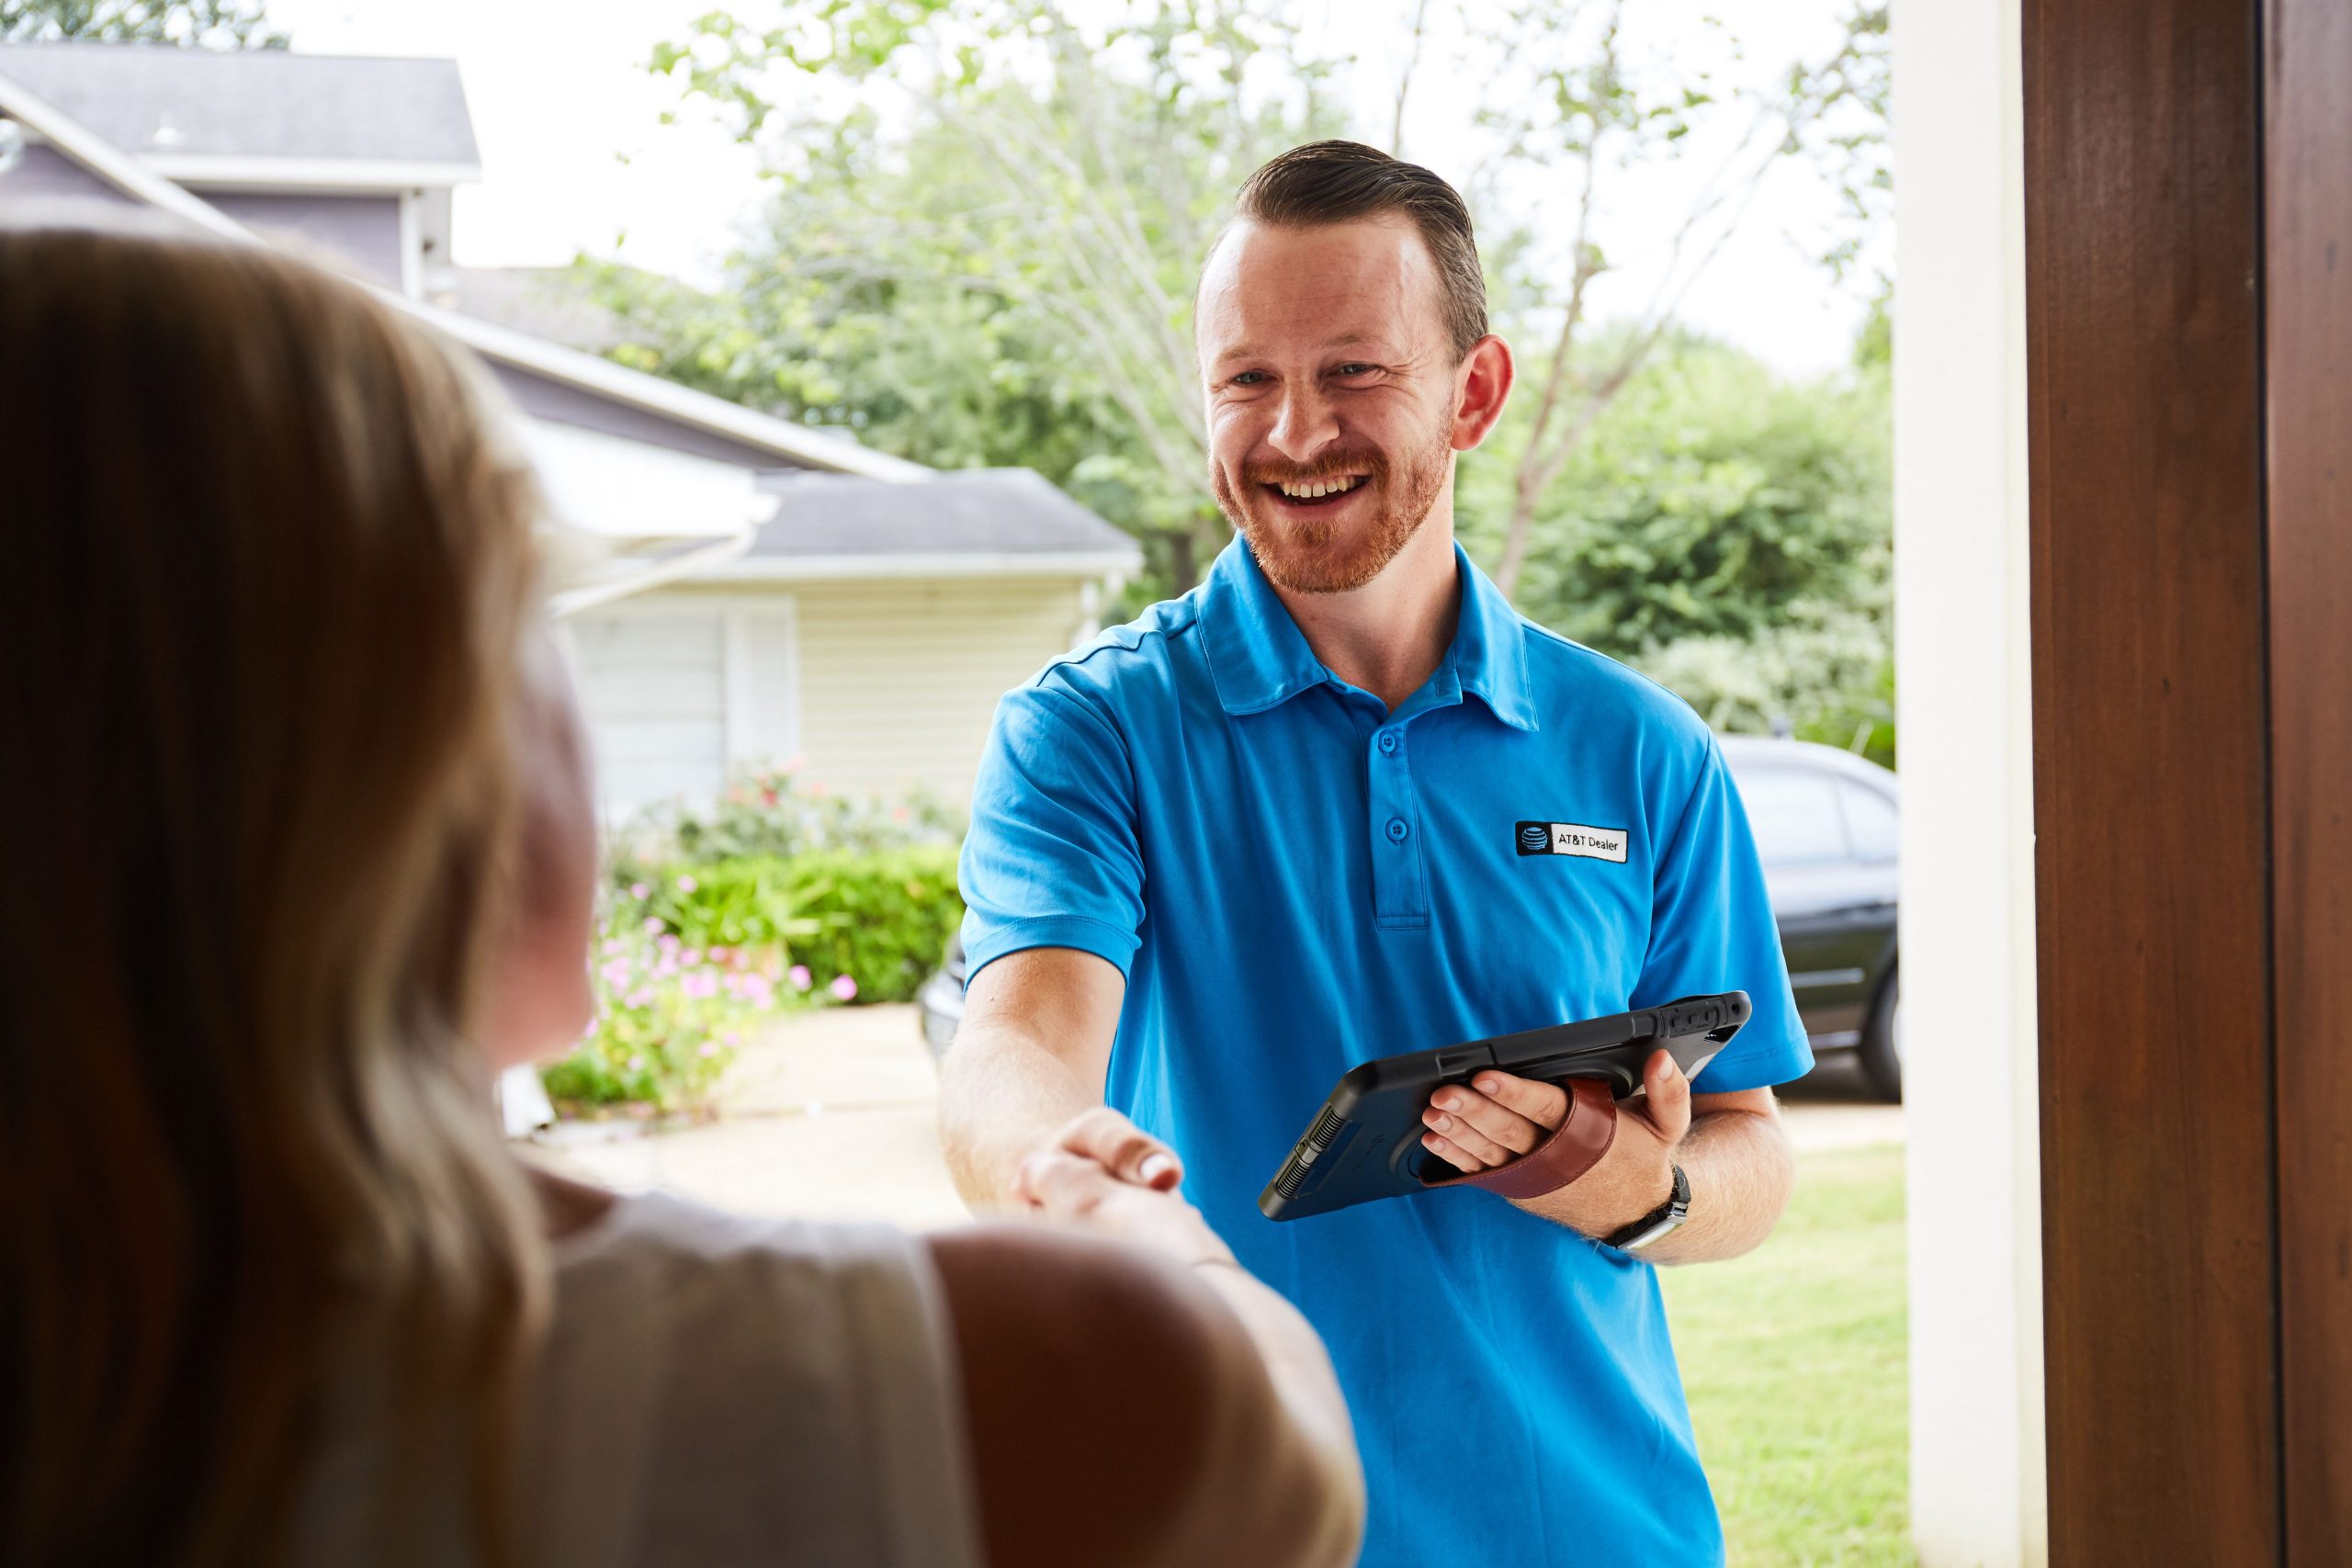 Door-to-door sales still works. Face to face sales should be part of your marketing mix.